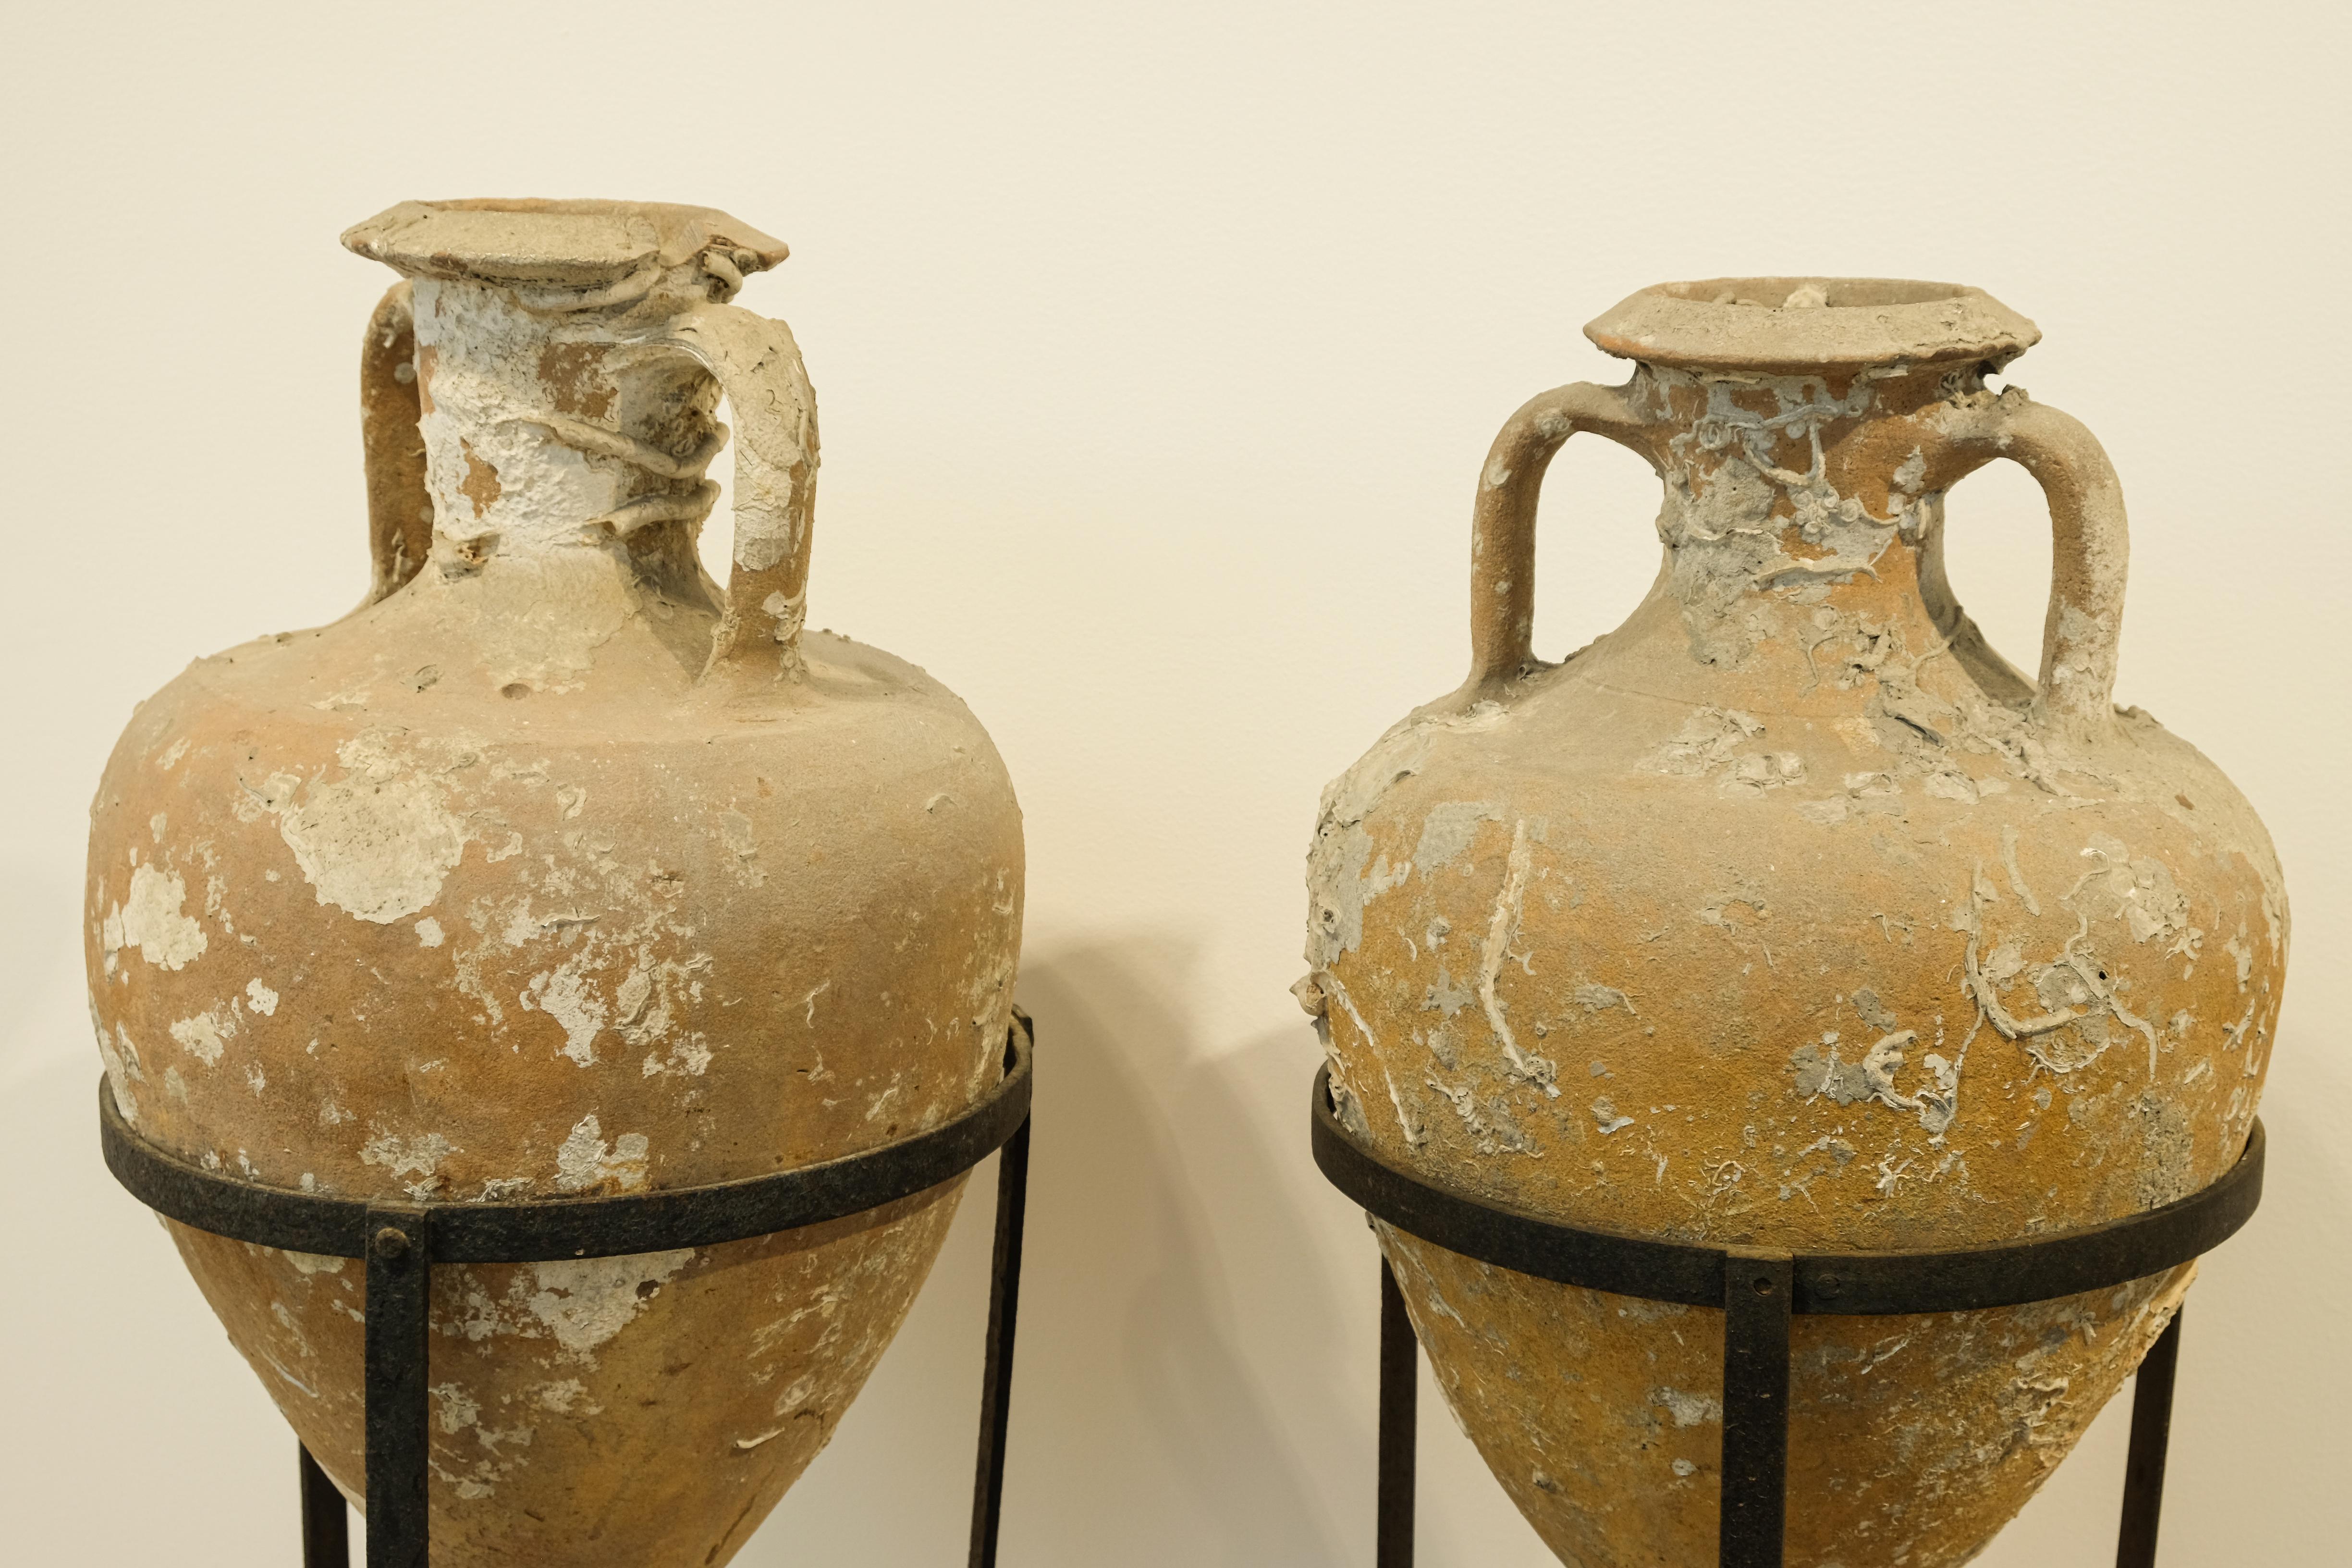 A pair of Roman sea salvaged amphorae likely 2nd-3rd century, with 19th century wrought iron stands. Amphorae were designed for marine transport of wine and found in shipwrecks dating back to the bronze age. Beautiful sea encrustations and patina.